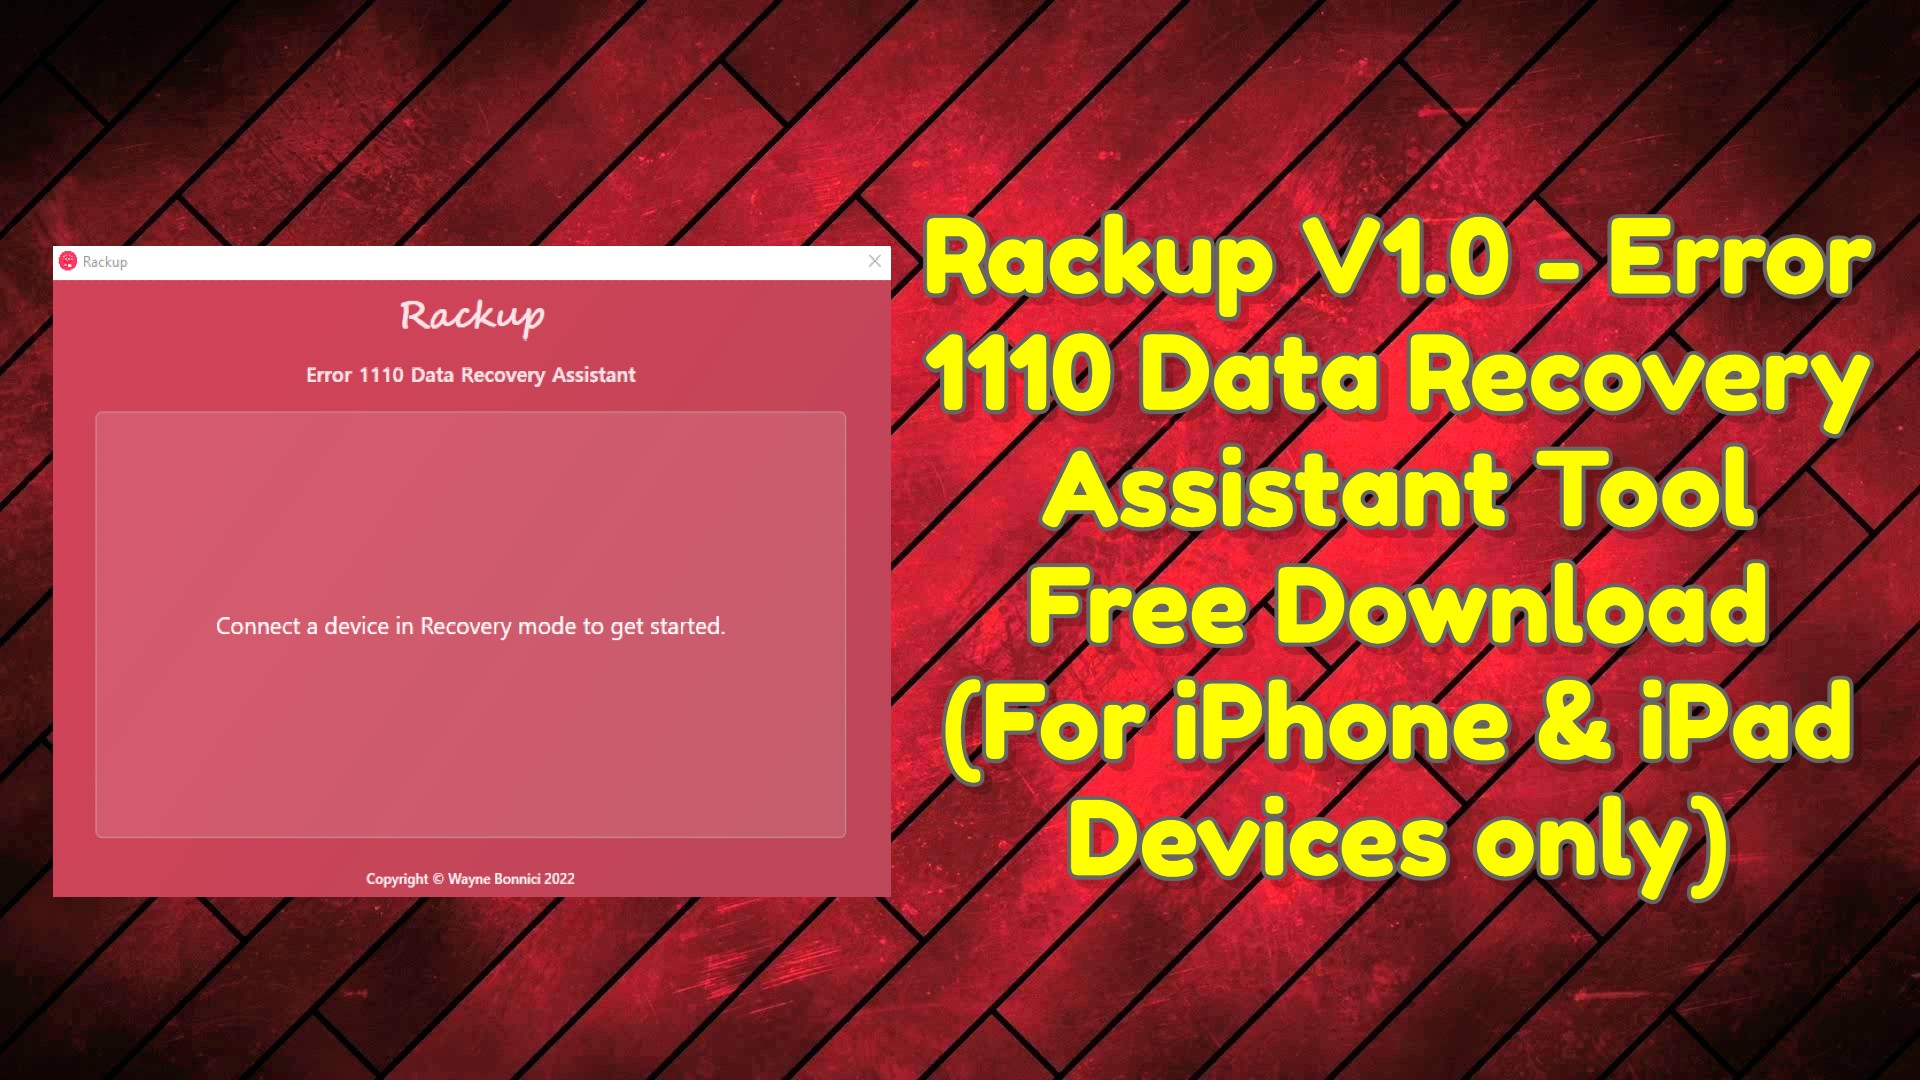 iPhone Rackup V1.0 - Error 1110 Data Recovery Assistant Tool